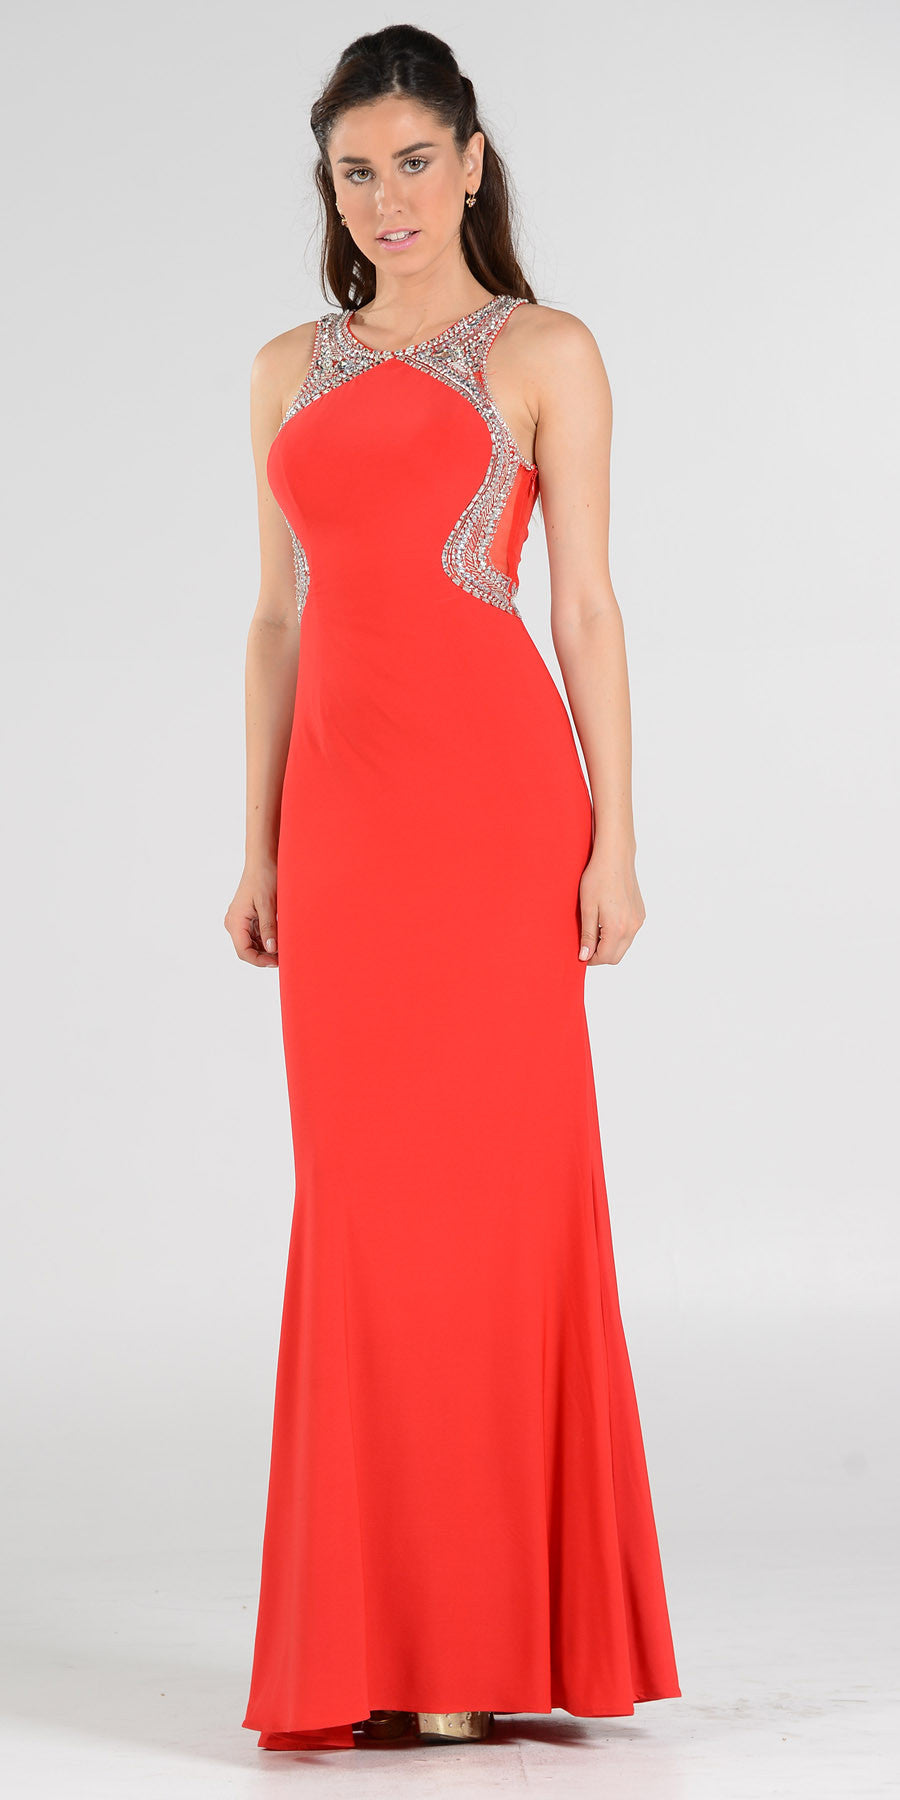 Poly USA 7192 Full Length Sexy Prom Gown Red Sheath